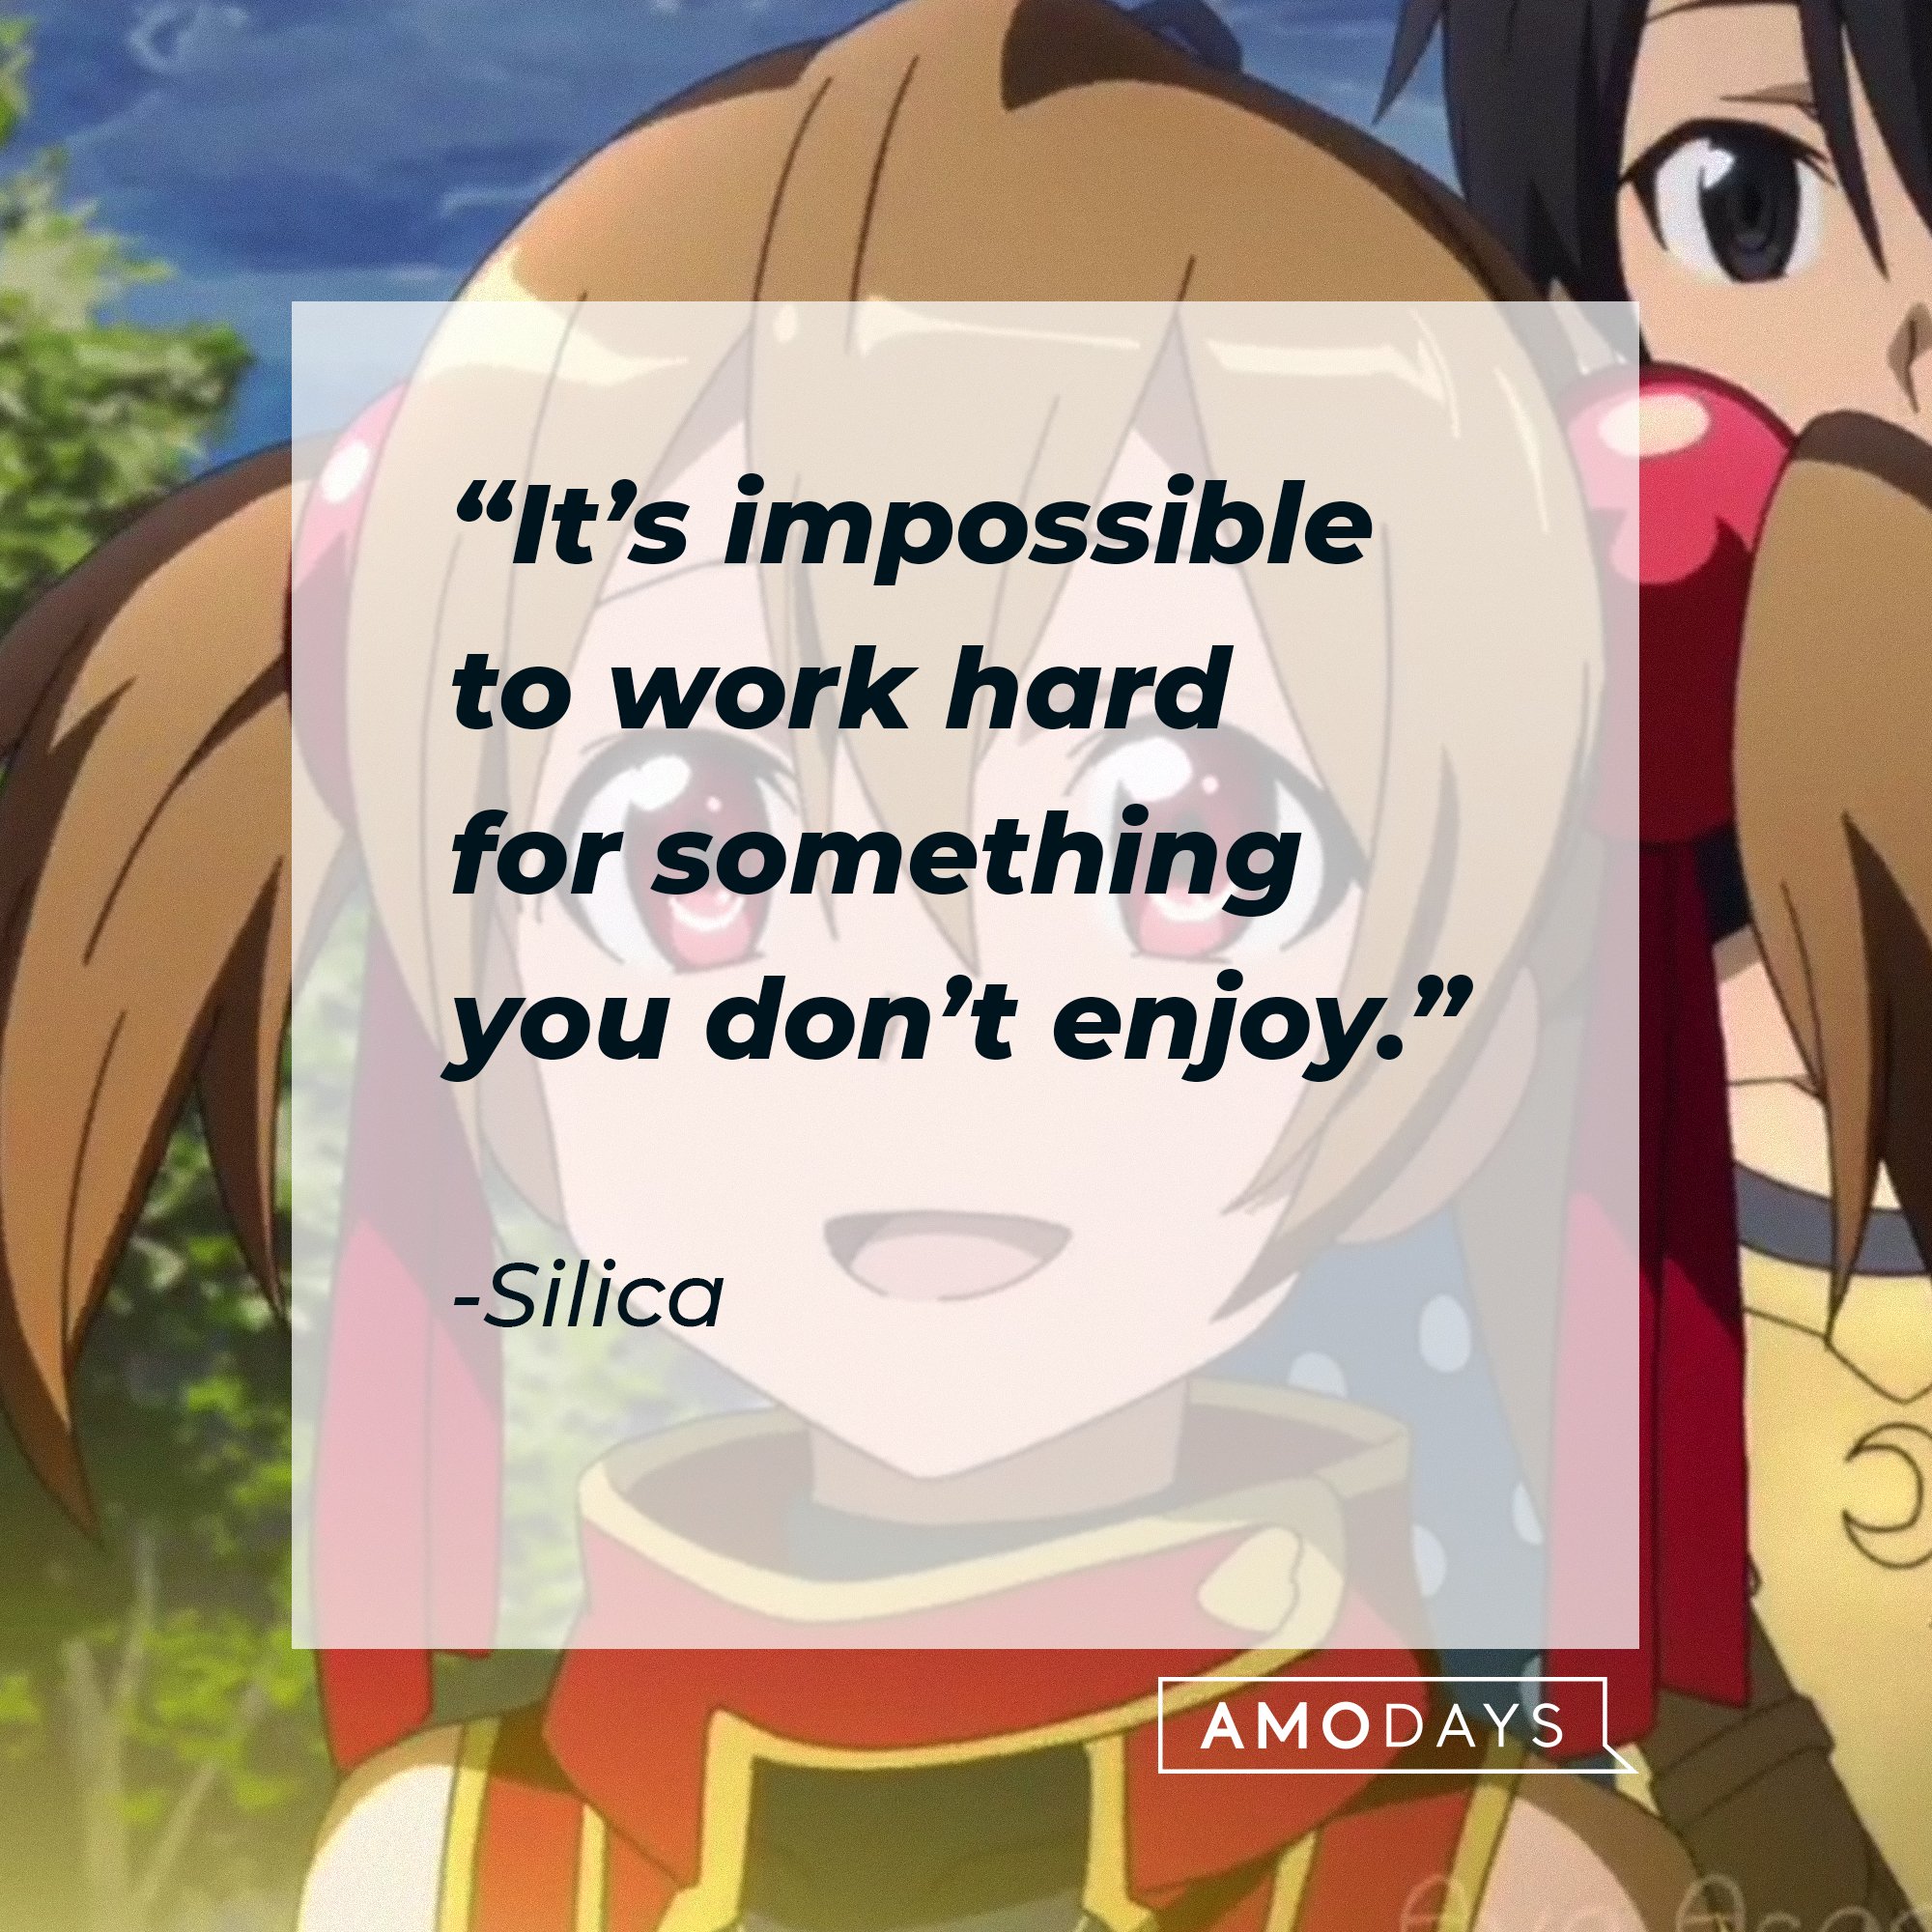 Silica’s quote: “It’s impossible to work hard for something you don’t enjoy.”  | Image: AmoDays